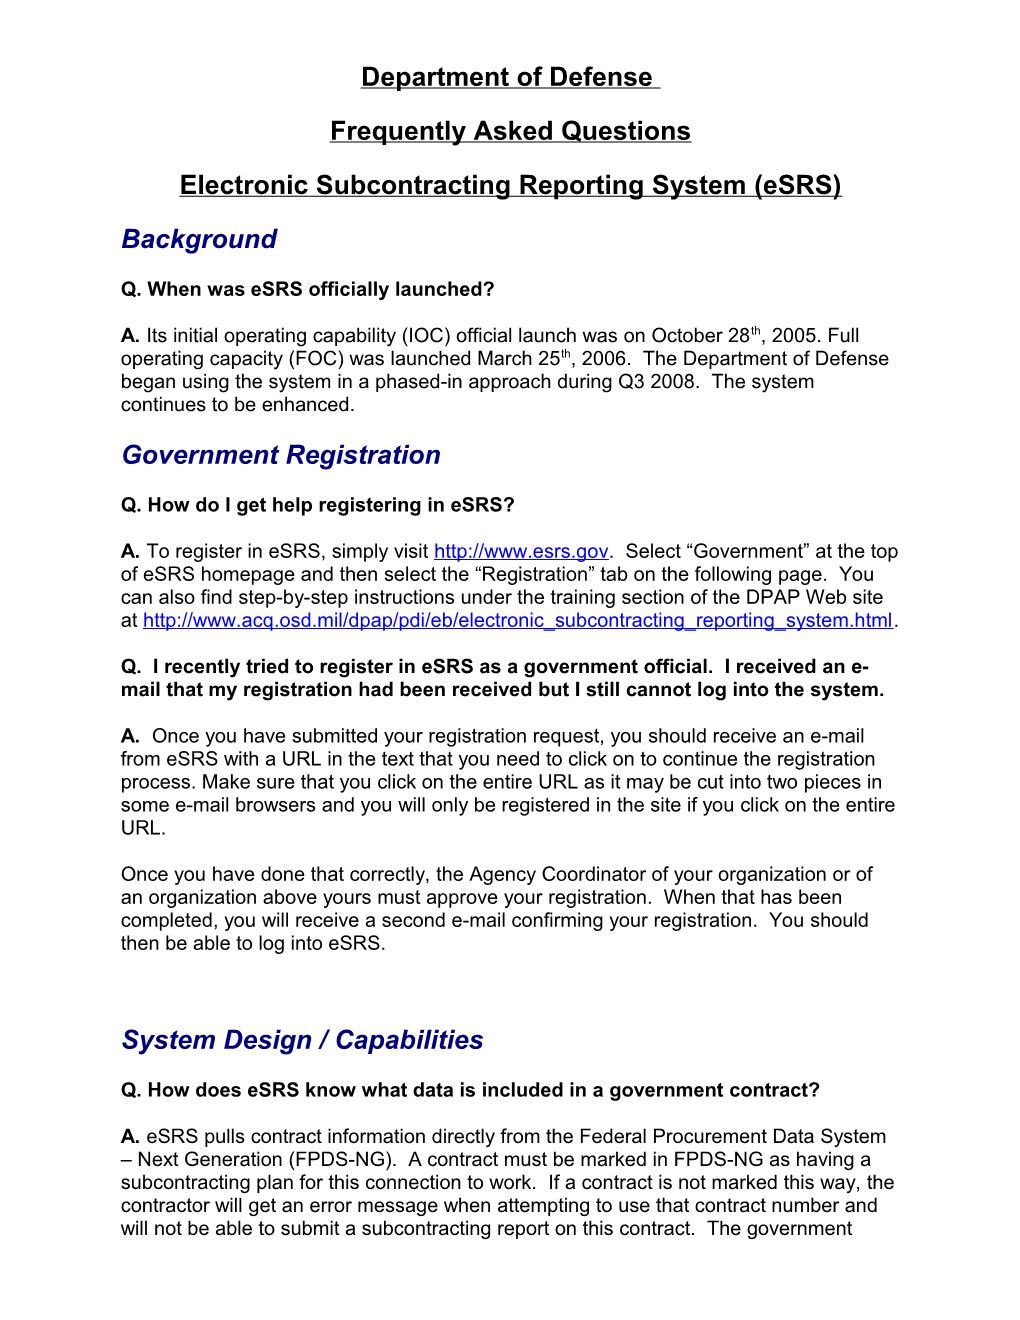 Electronic Subcontracting Reporting System (Esrs)